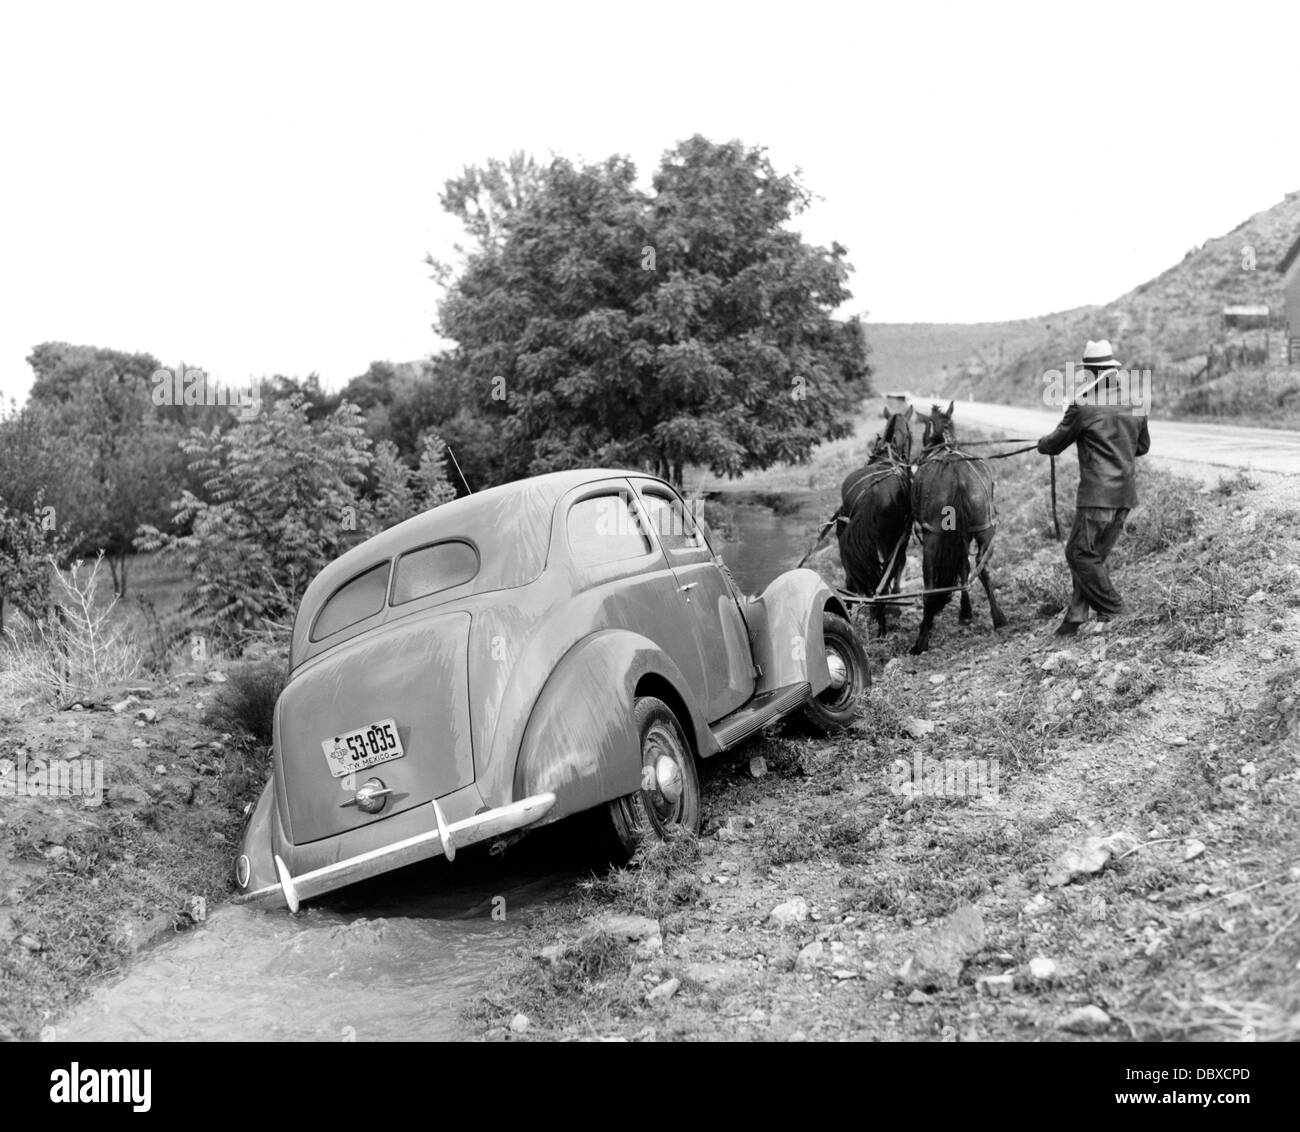 1930s 1937 FORD V-8 BEING PULLED OUT OF RURAL ROAD DITCH BY MAN WITH TEAM OF TWO HORSES Stock Photo